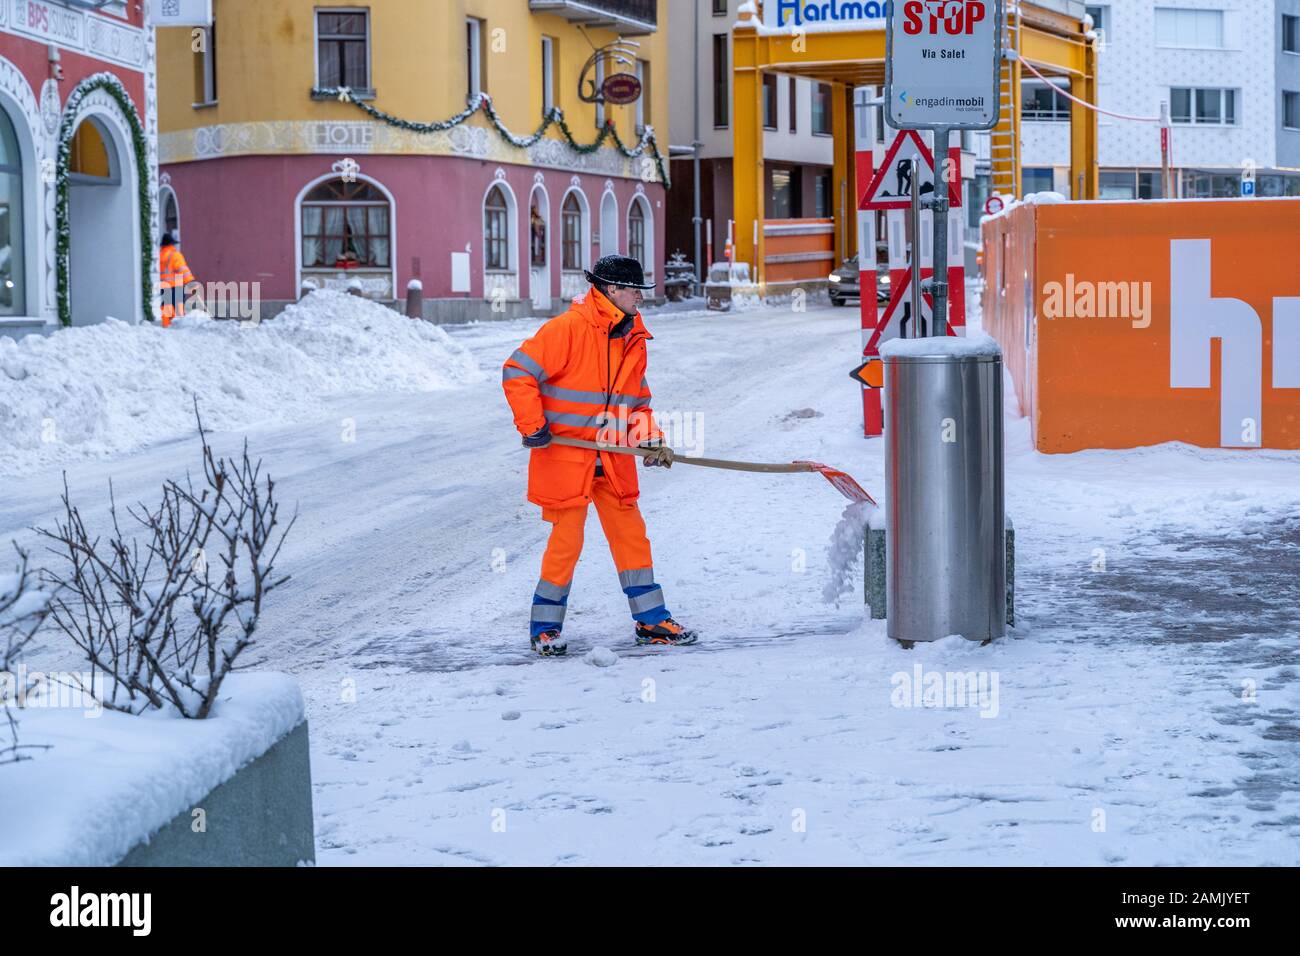 St. Moritz, Switzerland - 22 December - Road cleanup worker in bright orange coat clears up snow from the road at a street in St. Moritz, Switzerland Stock Photo